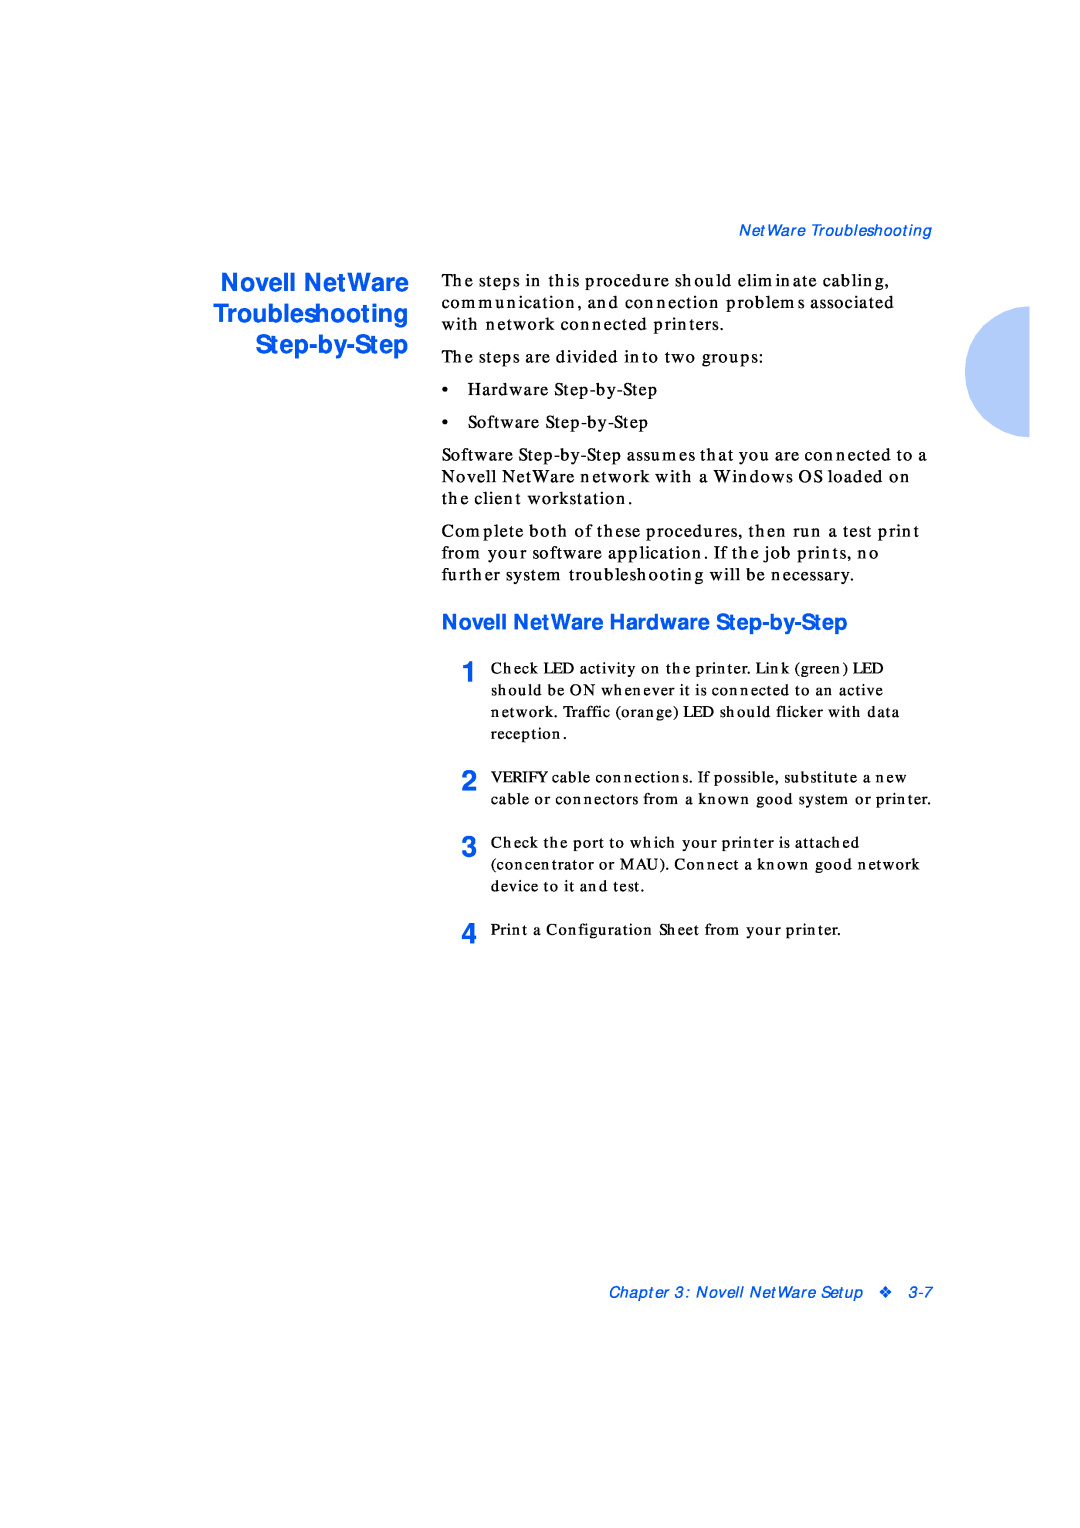 Xerox Network Laser Printers manual Novell NetWare Troubleshooting Step-by-Step, Novell NetWare Hardware Step-by-Step 